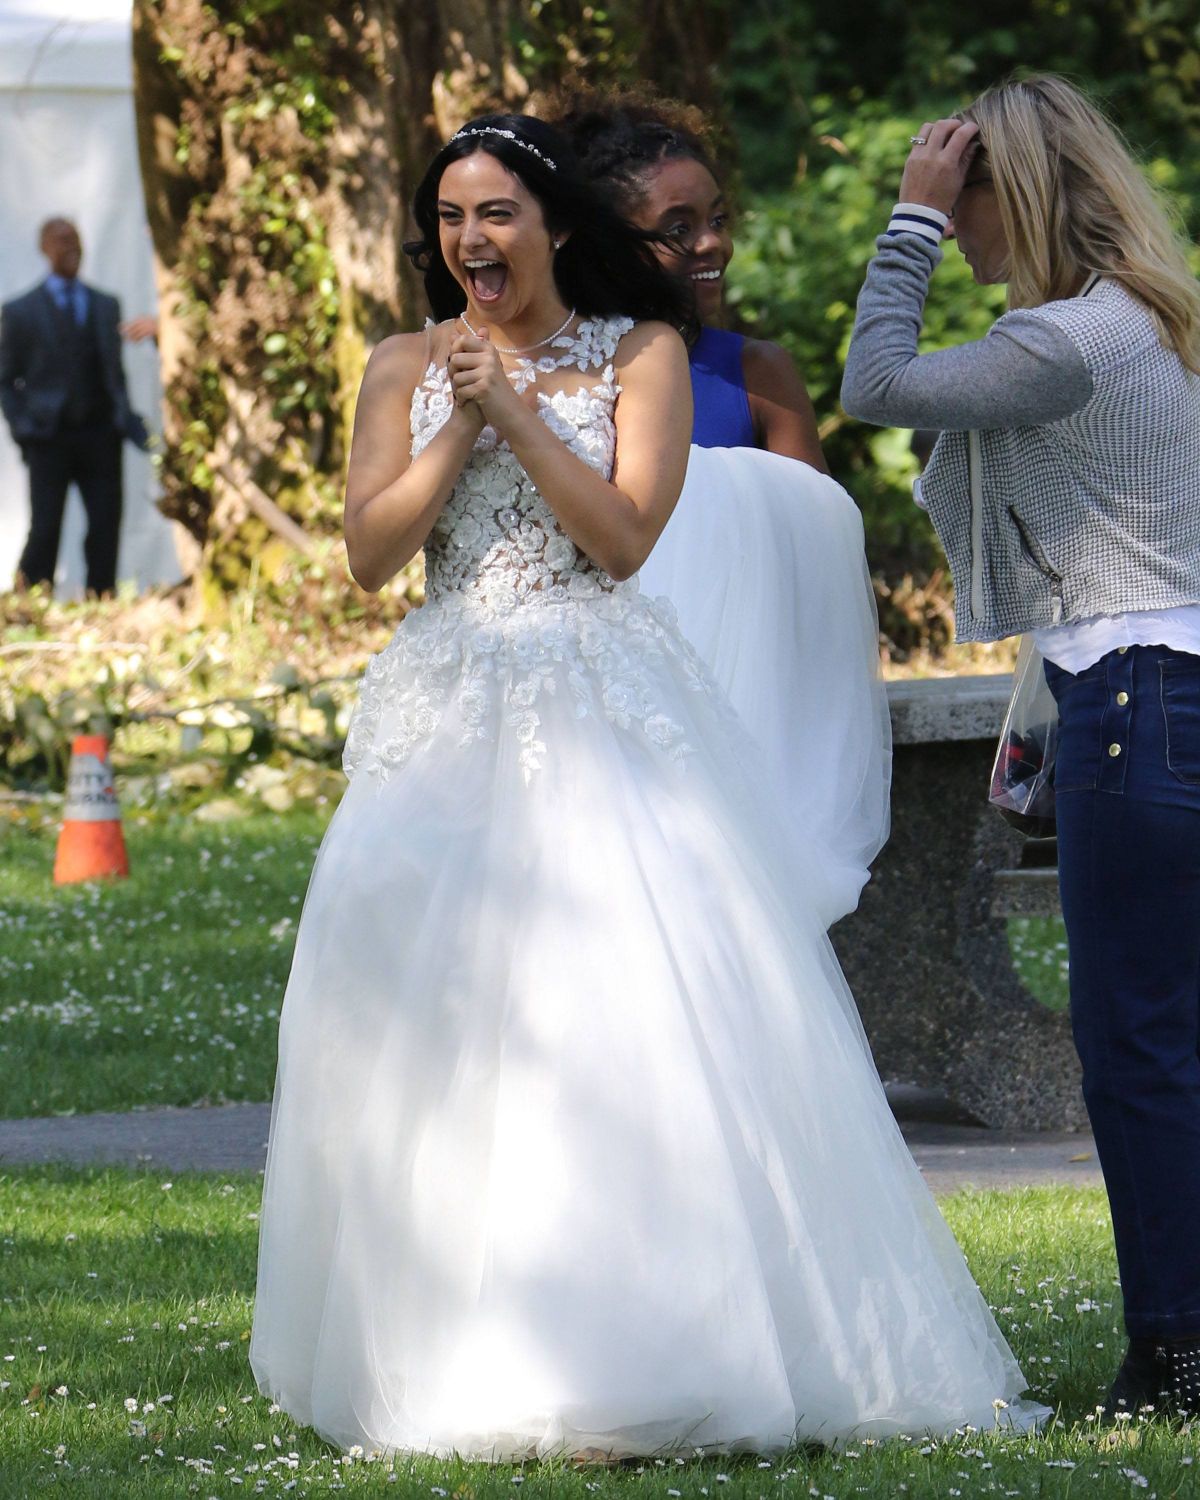 CAMILA MENDES in Wedding Dress on the Set of Riverdale in Vancouver 06/26/2017